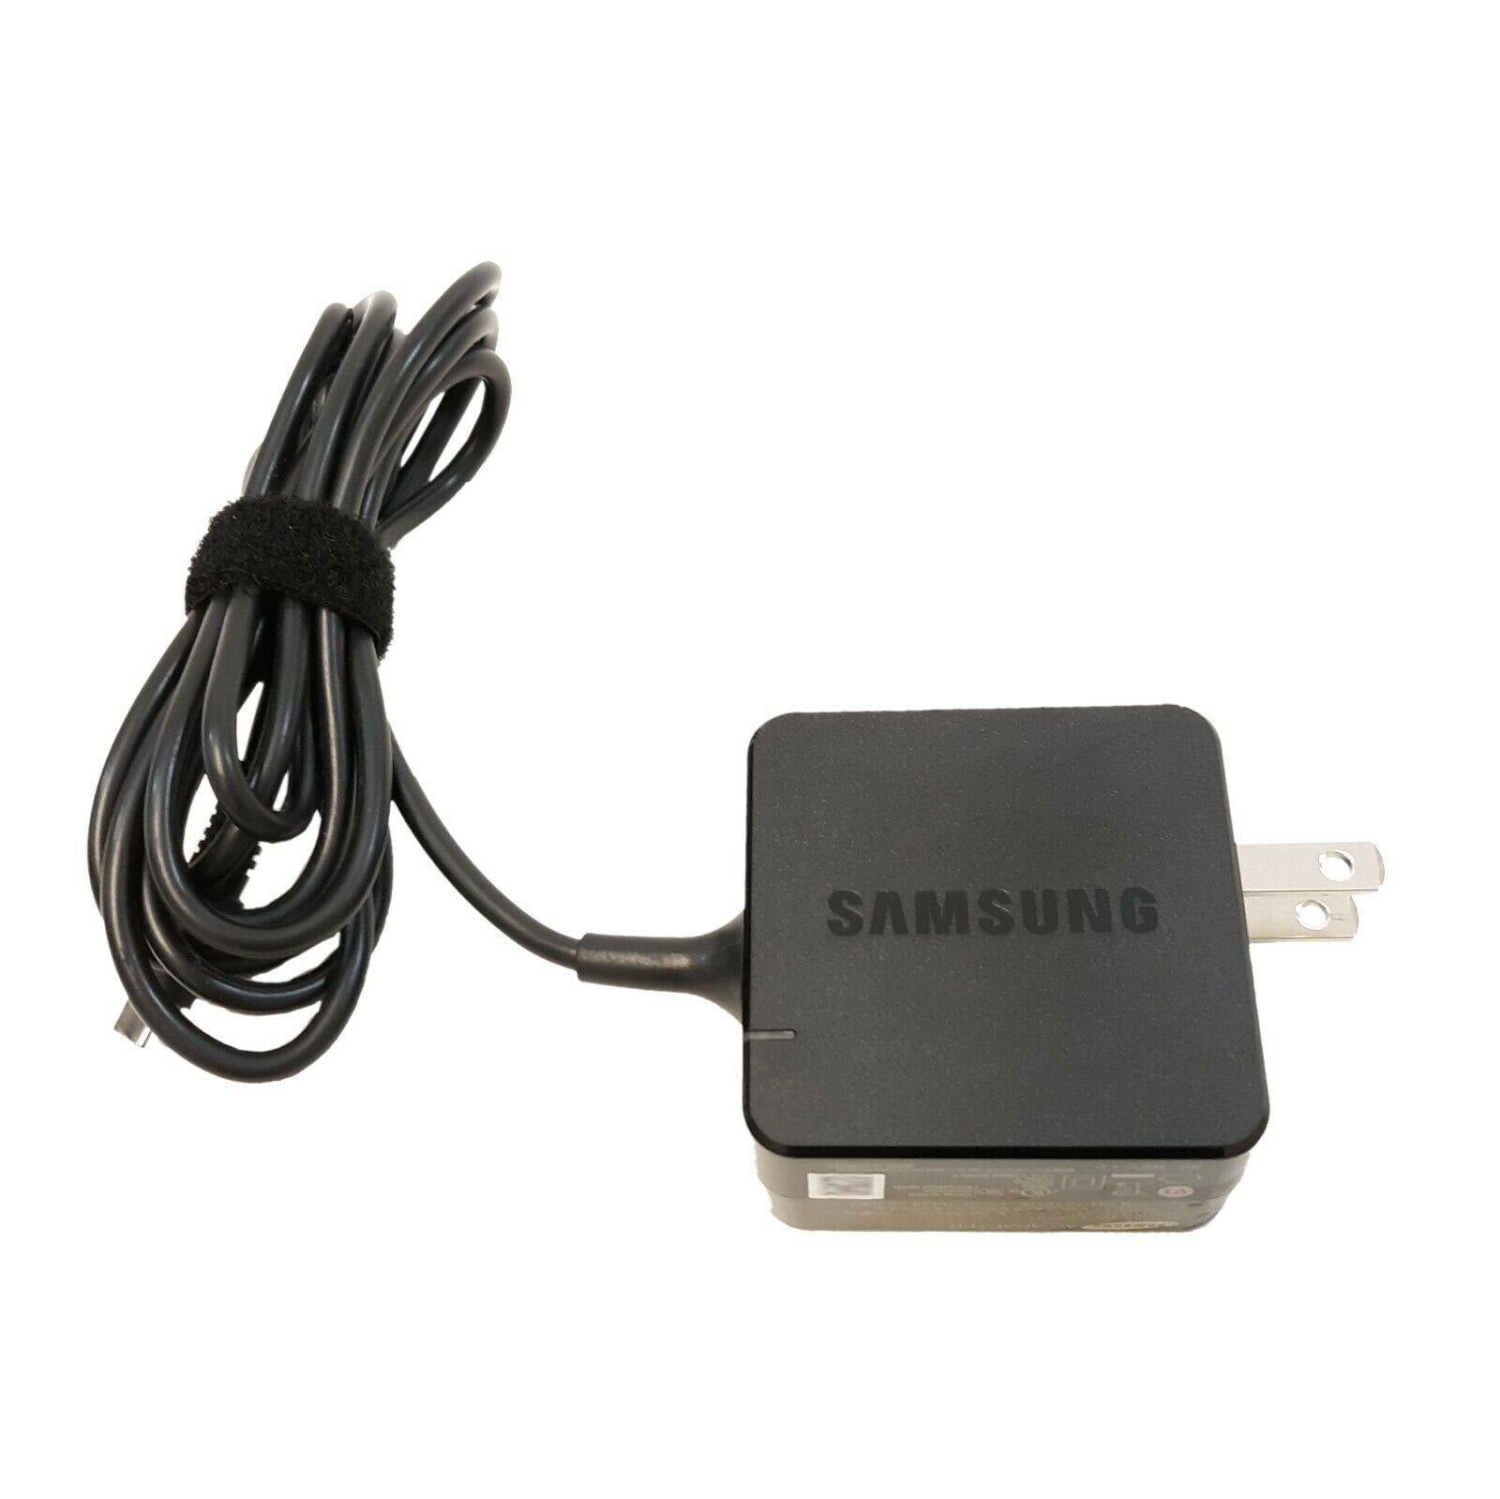 New Genuine Samsung AC adapter charger USB-C 45W PA-1300-87 PD-30ABUS BA44-00336A